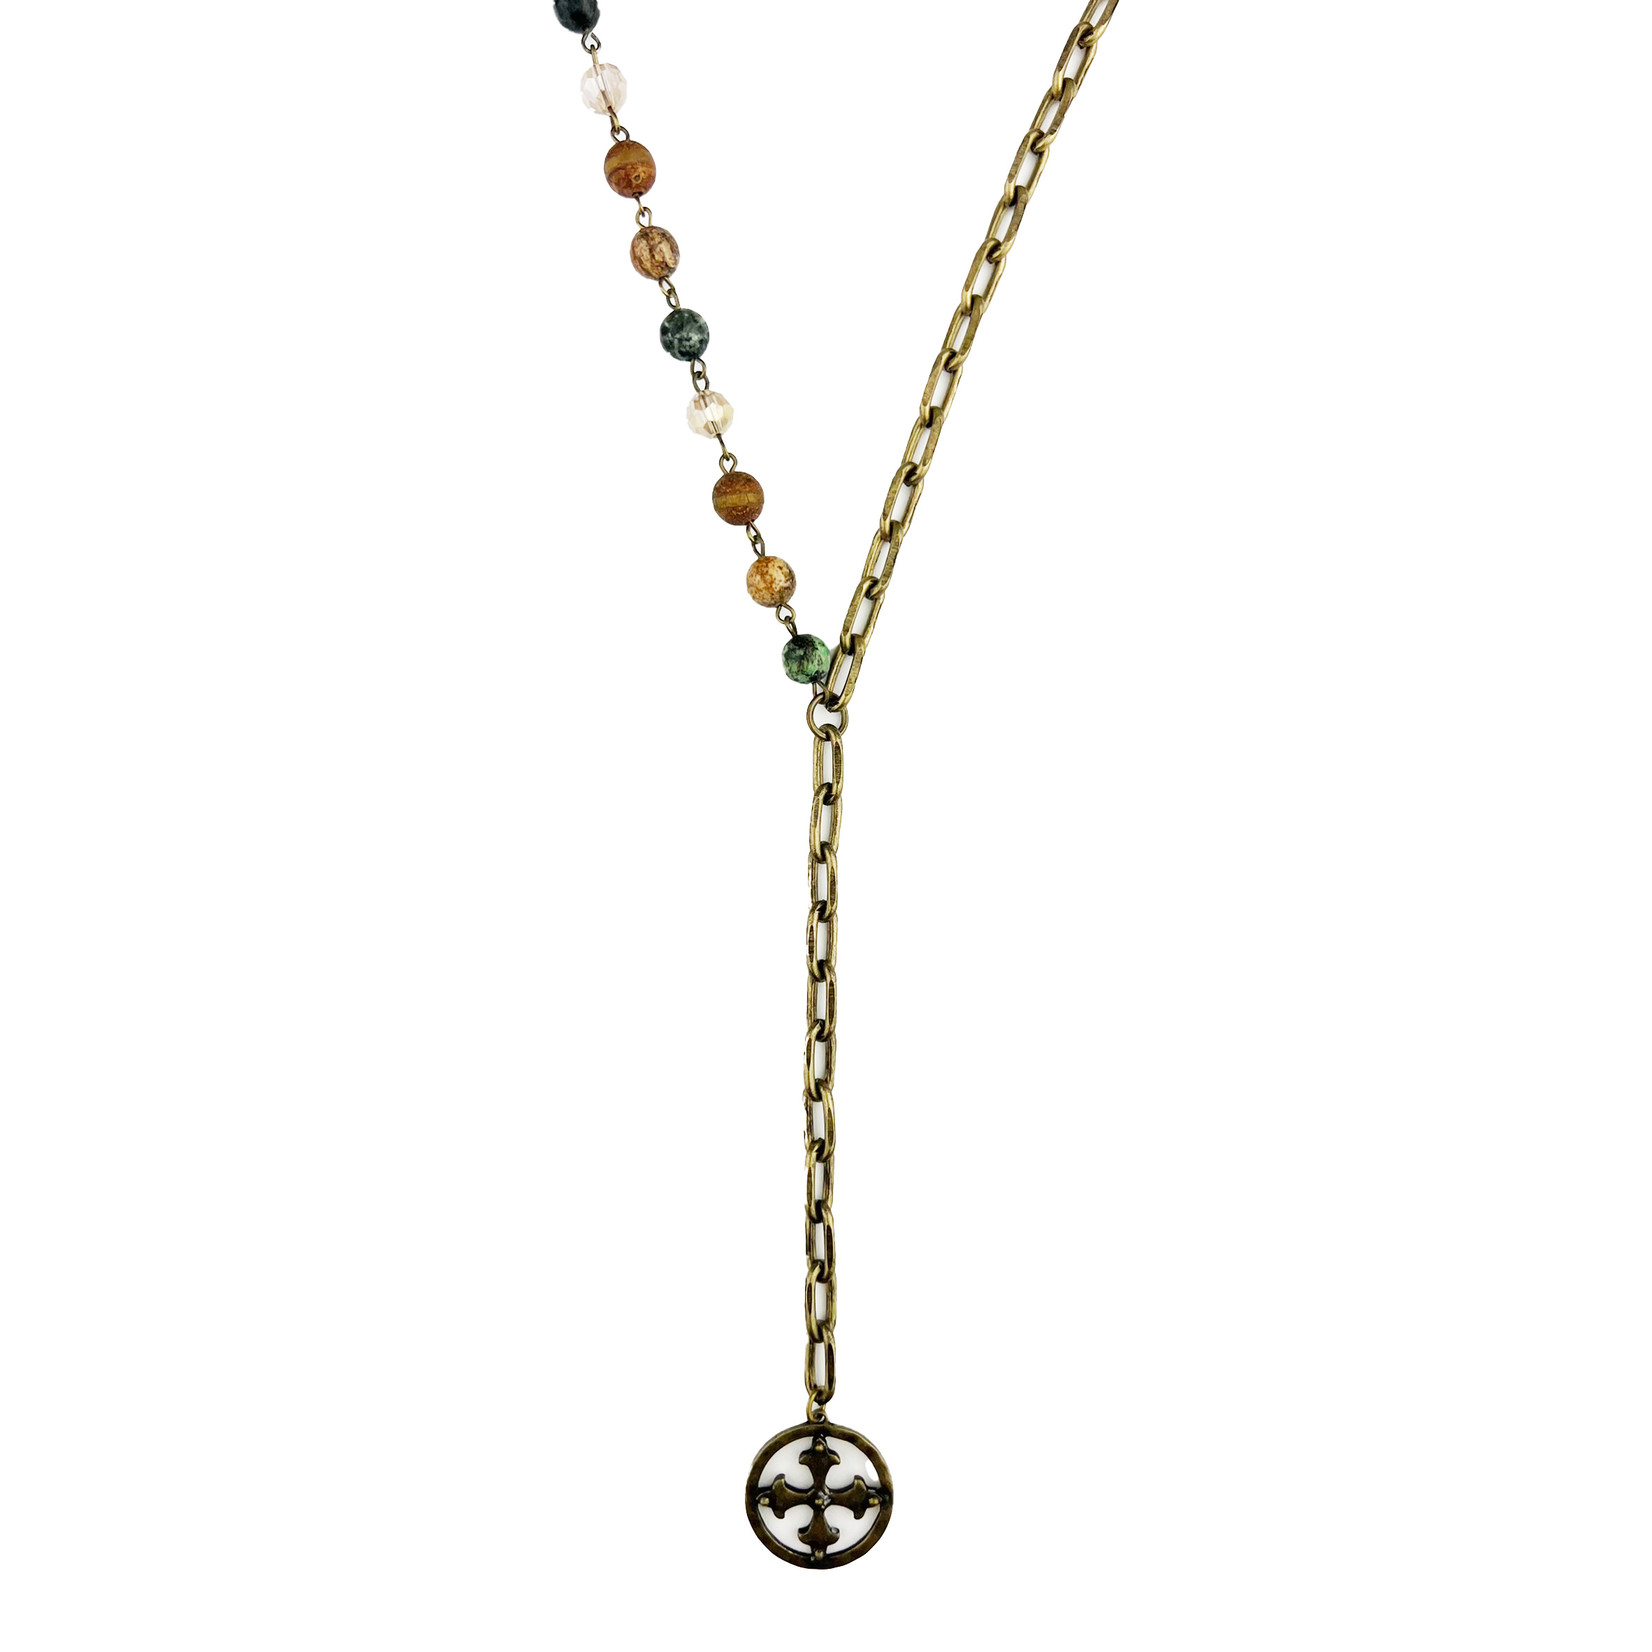 Chain & Beads Necklace with Coin Cross Pendant